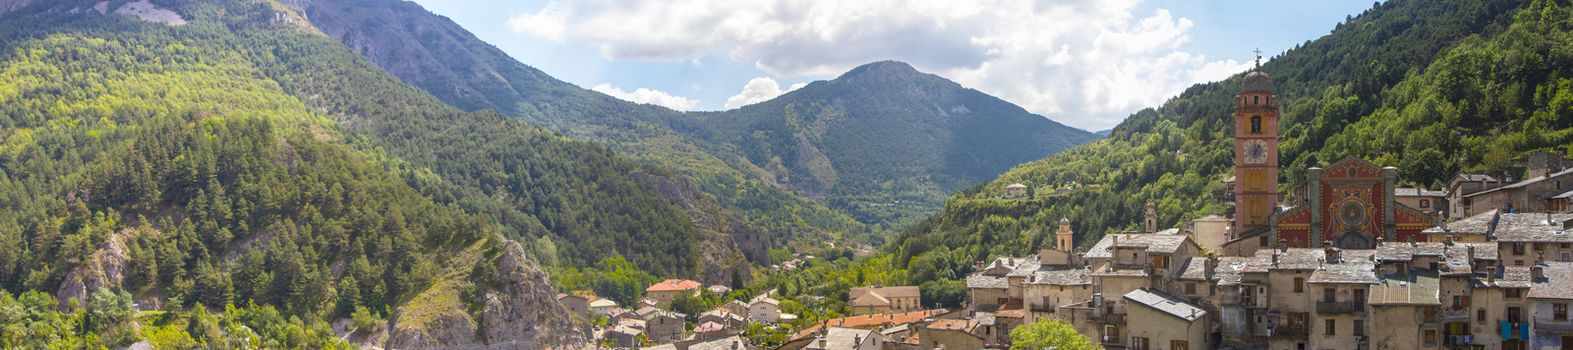 View of the village of Tende and the valley, France.